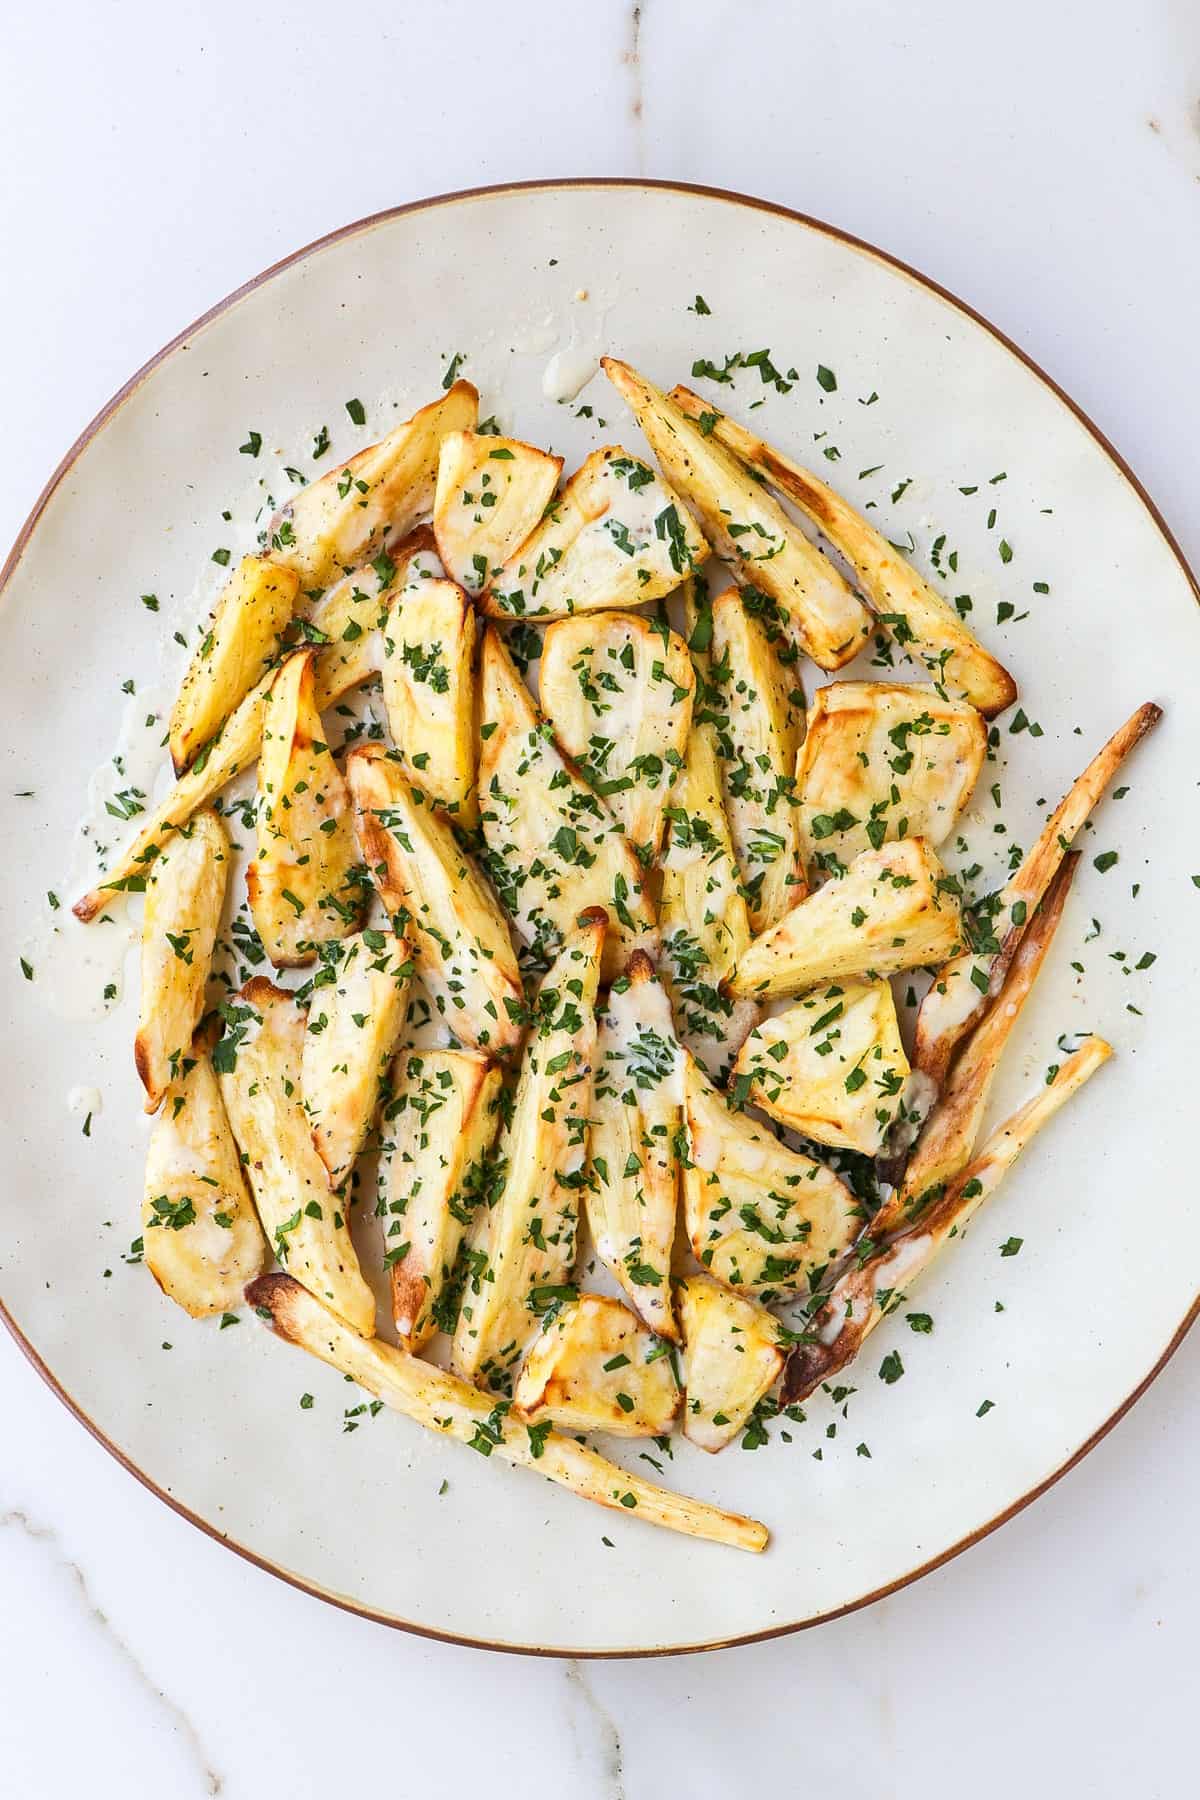 Air fried parsnips on a plate with tahini sauce and parsley.